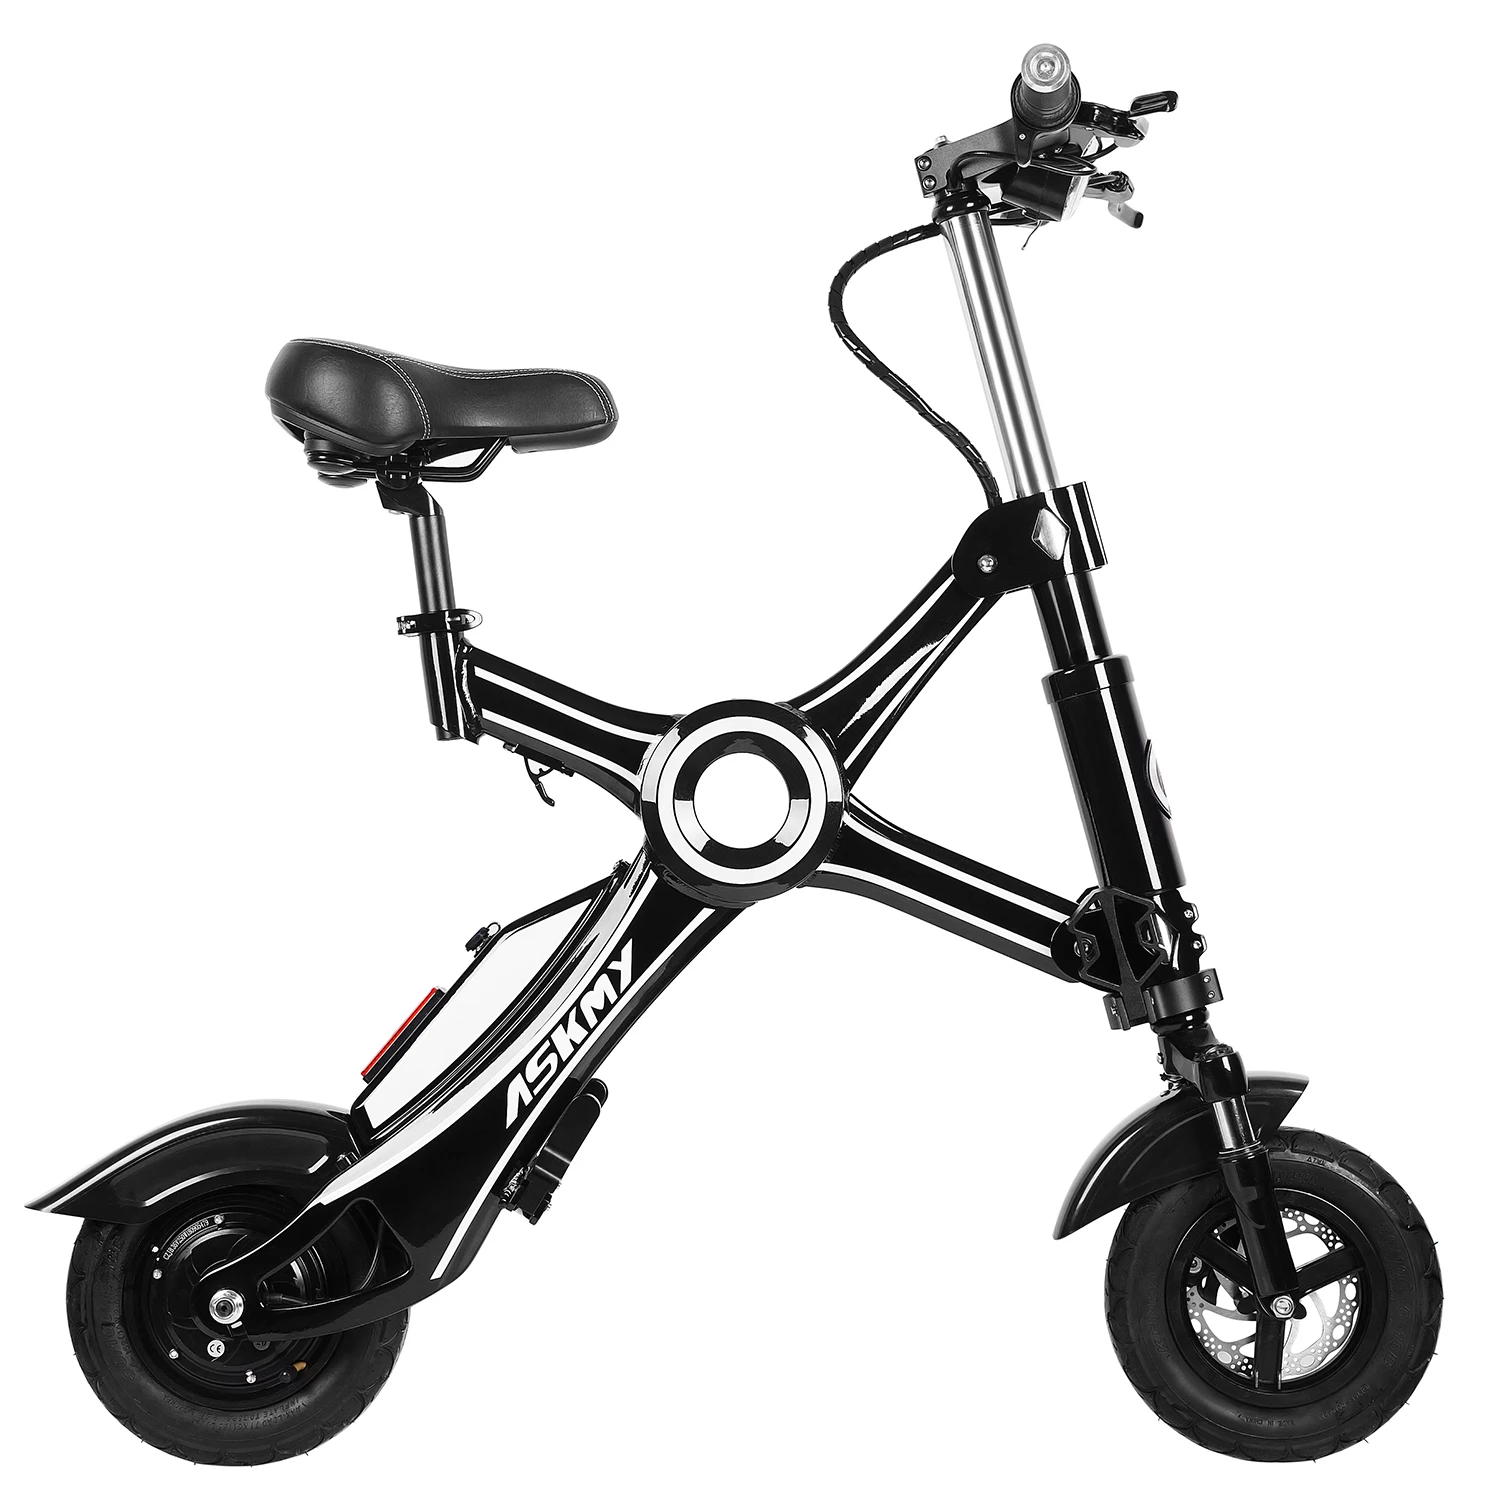 

ASKMY X1 NEW 250W 10 inch Fat Tire Electric Folding Bike 36V Lithium Battery Electric Bicycle Factory Stock Wholesale